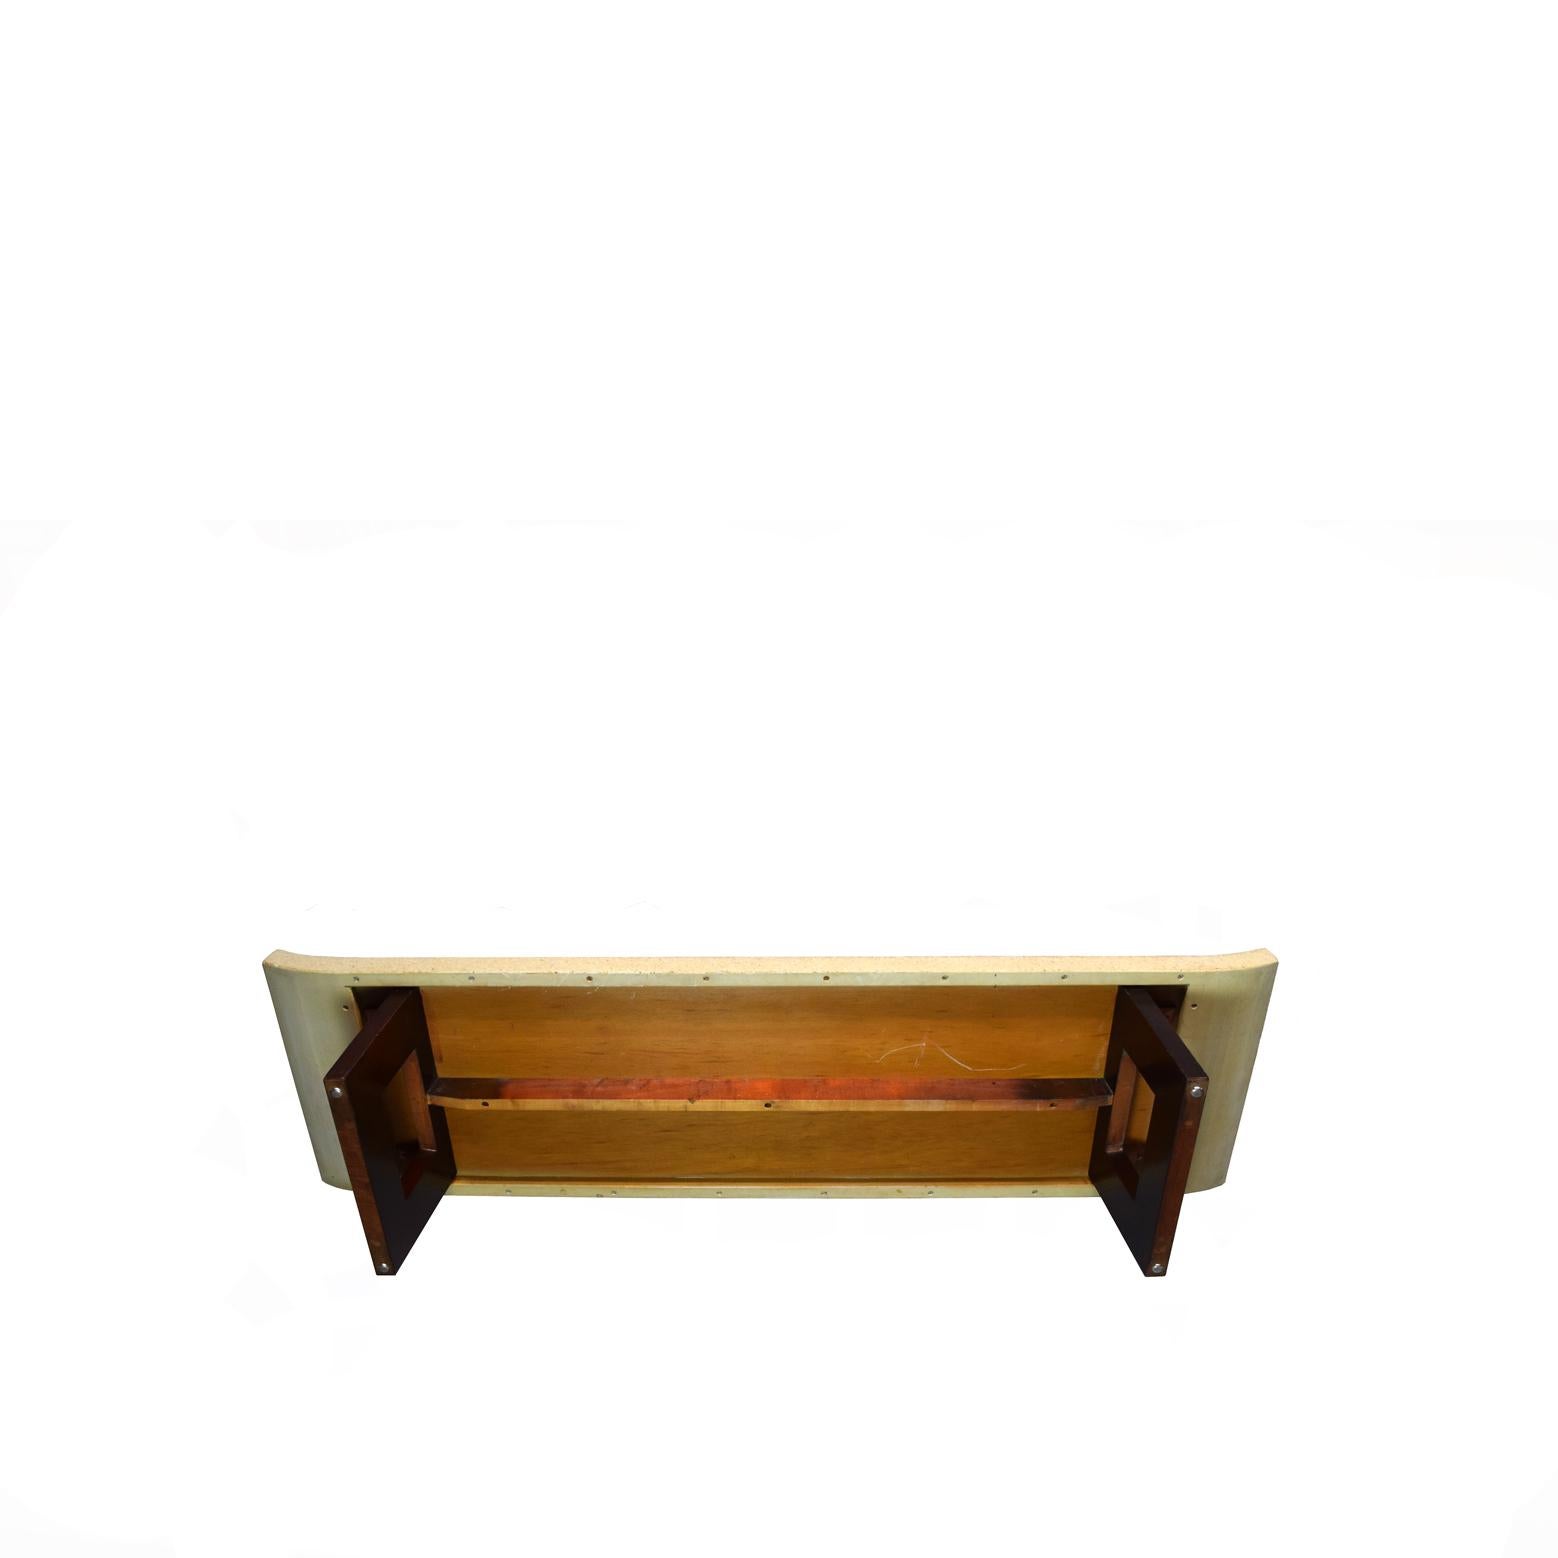 Mid-20th Century Paul Frankl Coffee Table, C. 1948 for Johnson Furniture Co For Sale